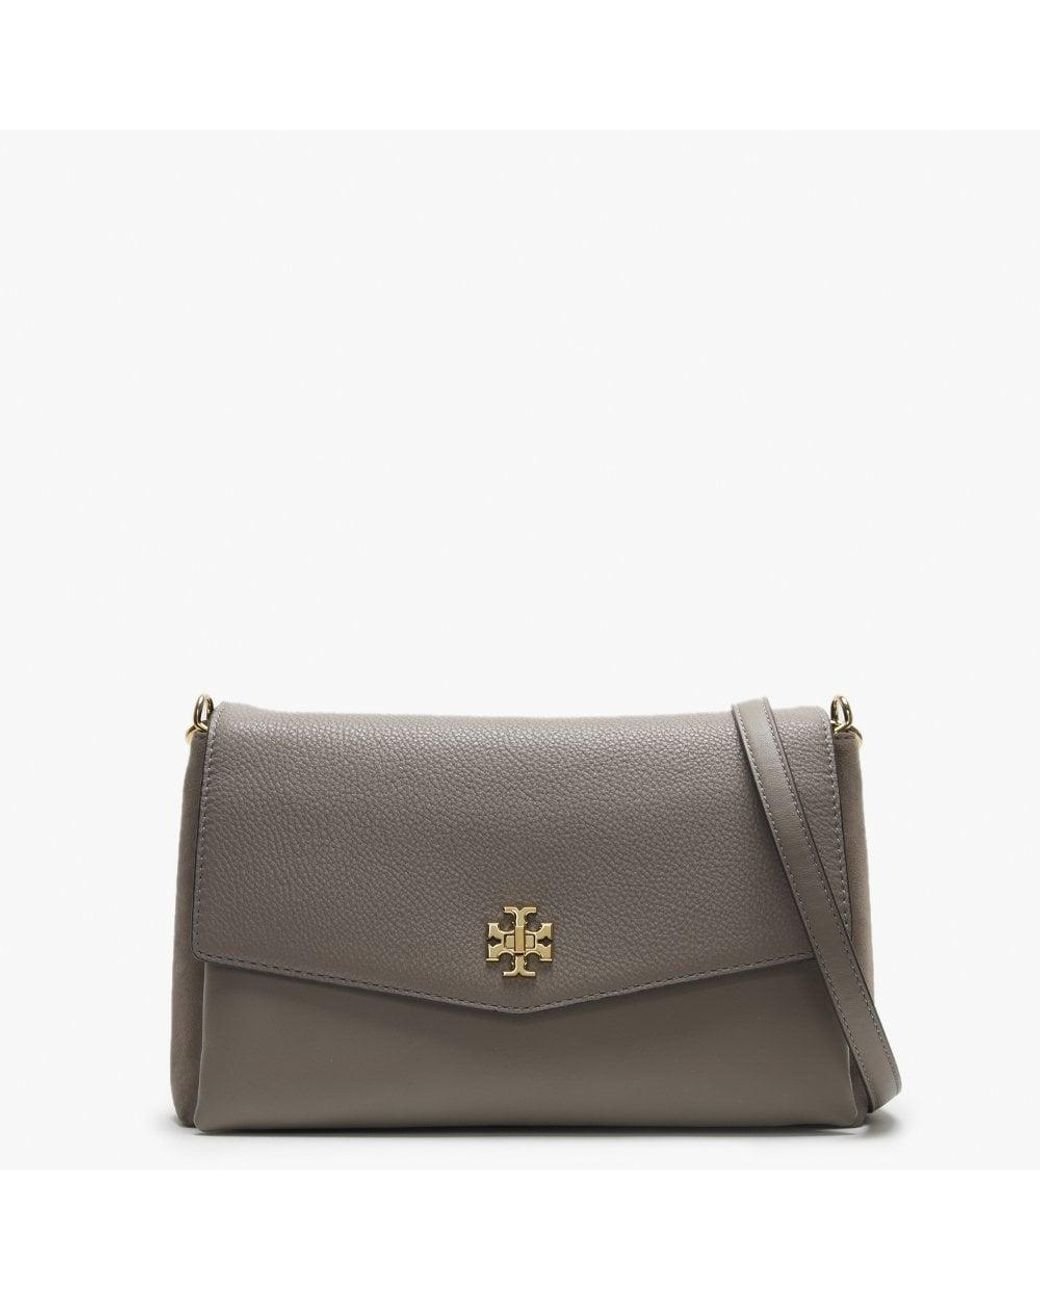 TORY BURCH: Kira bag in quilted leather - Dove Grey  Tory Burch crossbody  bags 56757 online at